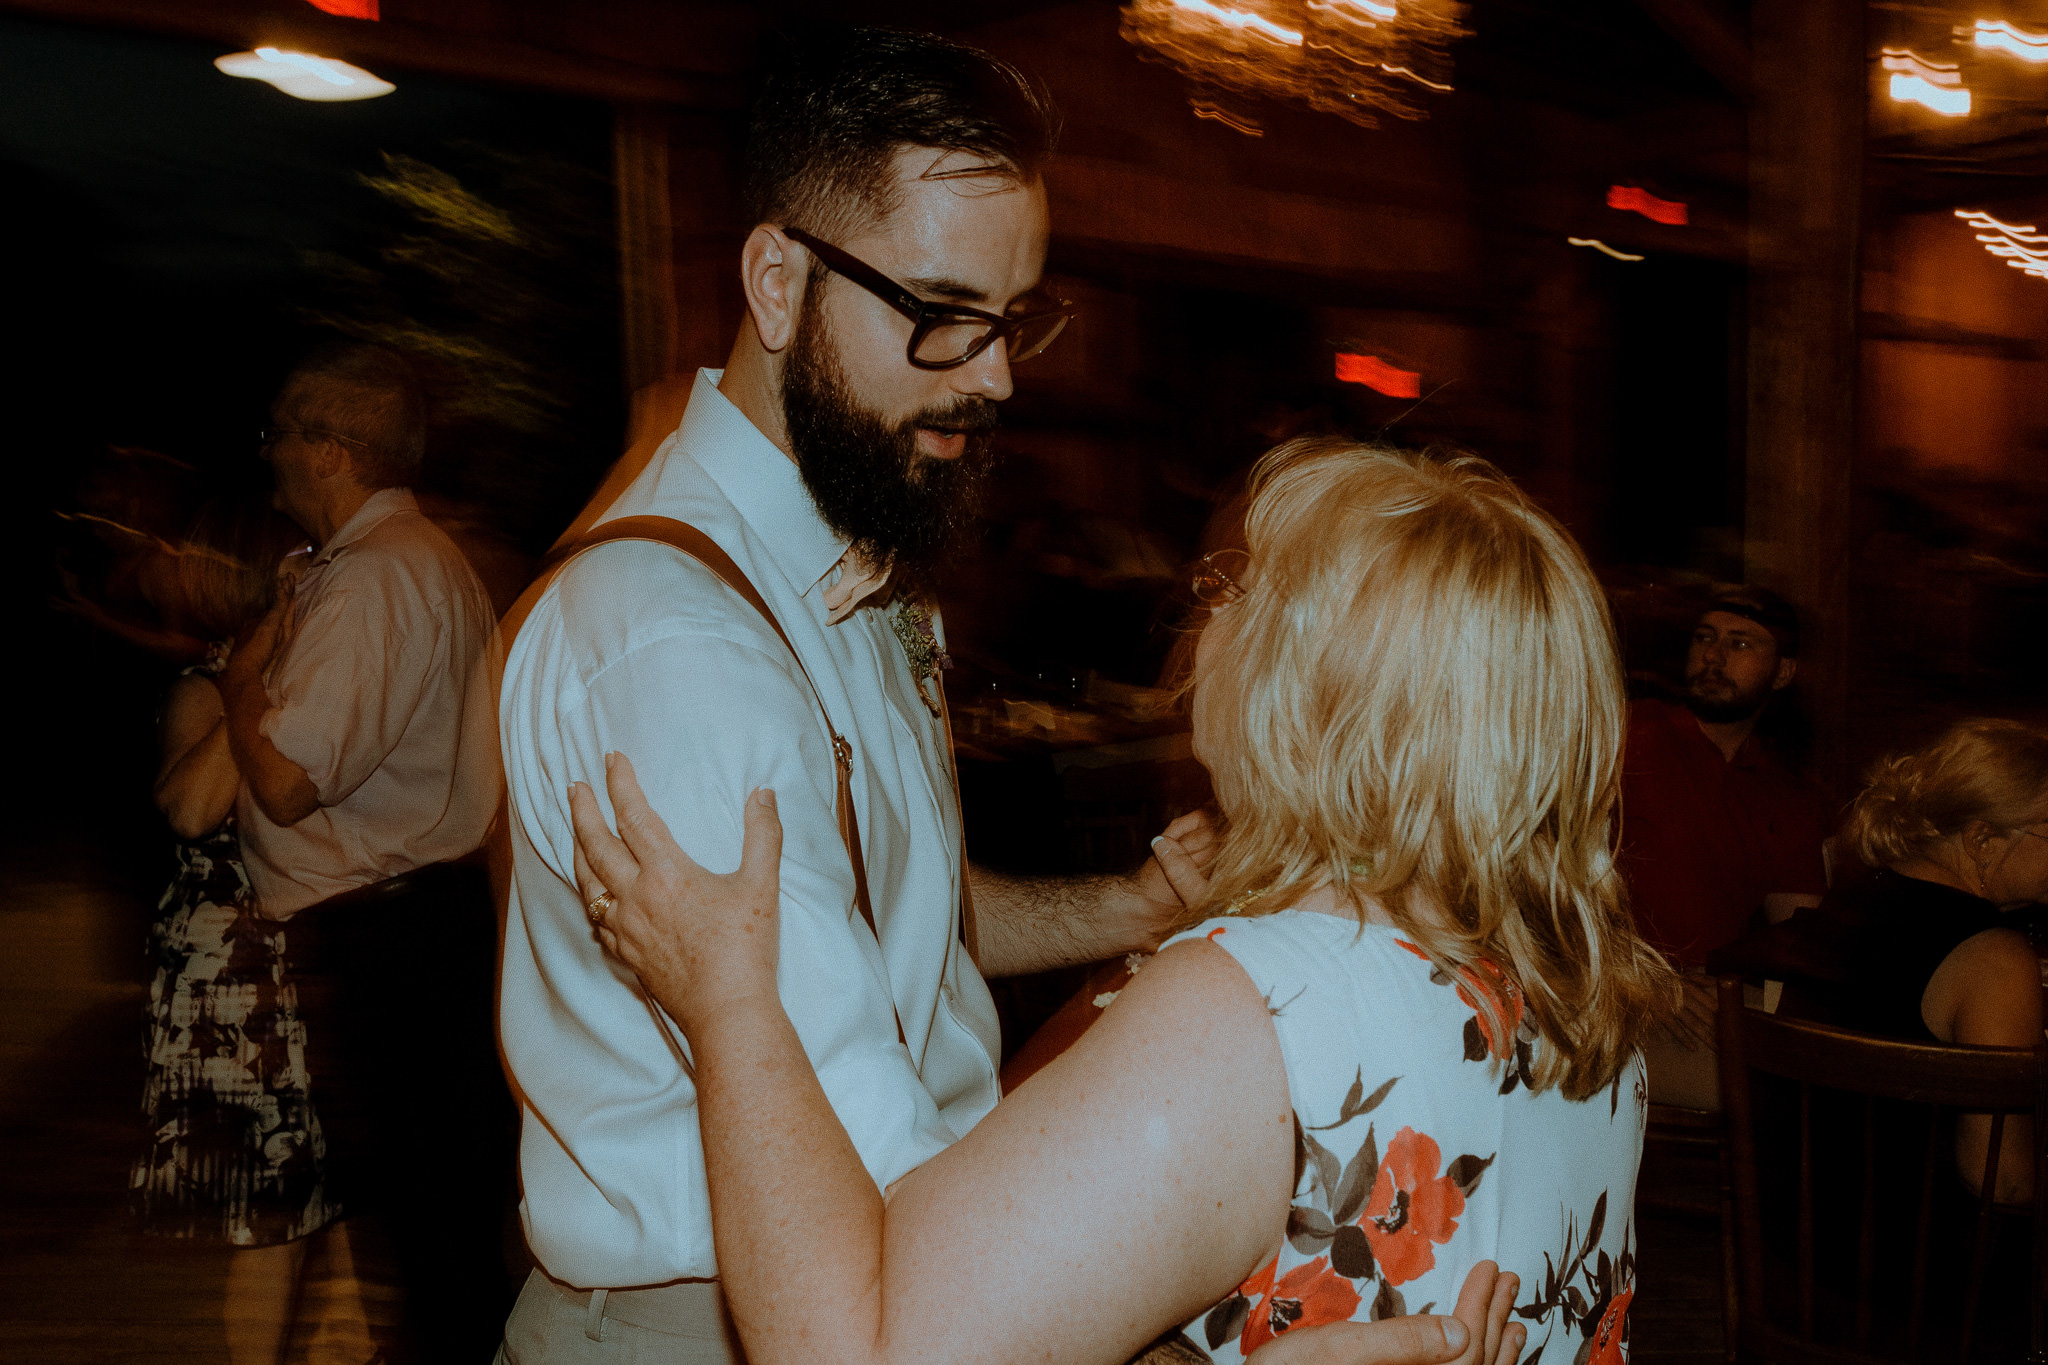 Mother Son Dance at Wedding